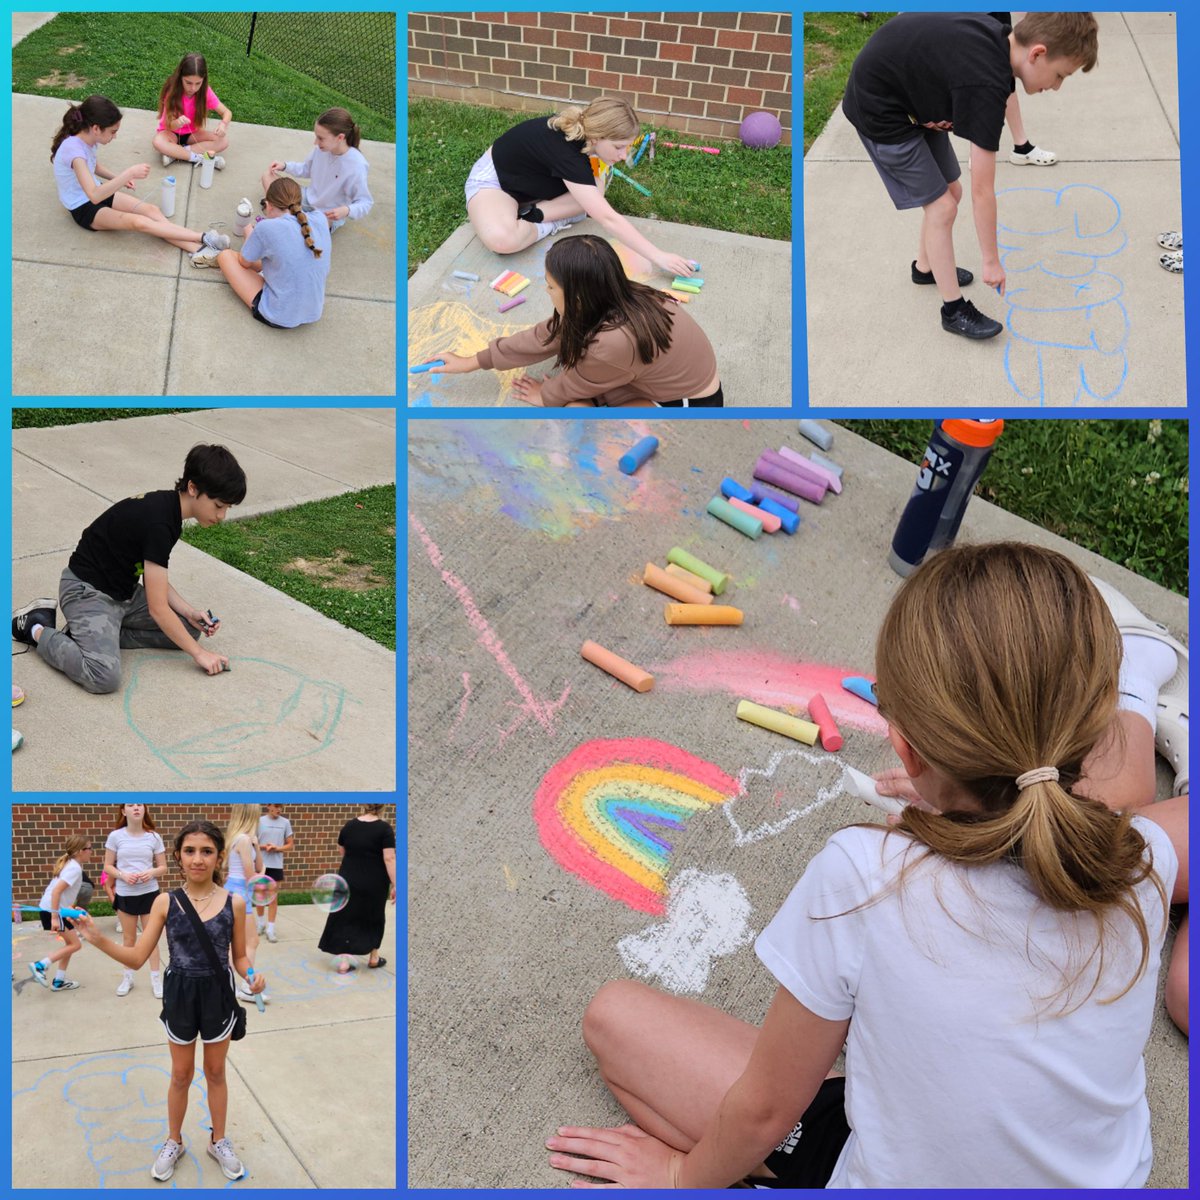 Today, we practiced some Wellness/ Mindfulness strategies. My station got to use sidewalk chalk to make art, blow bubbles, play games, and work on bracelet making. A very calming morning with our @WilsonElem Wildcats!💙🤍